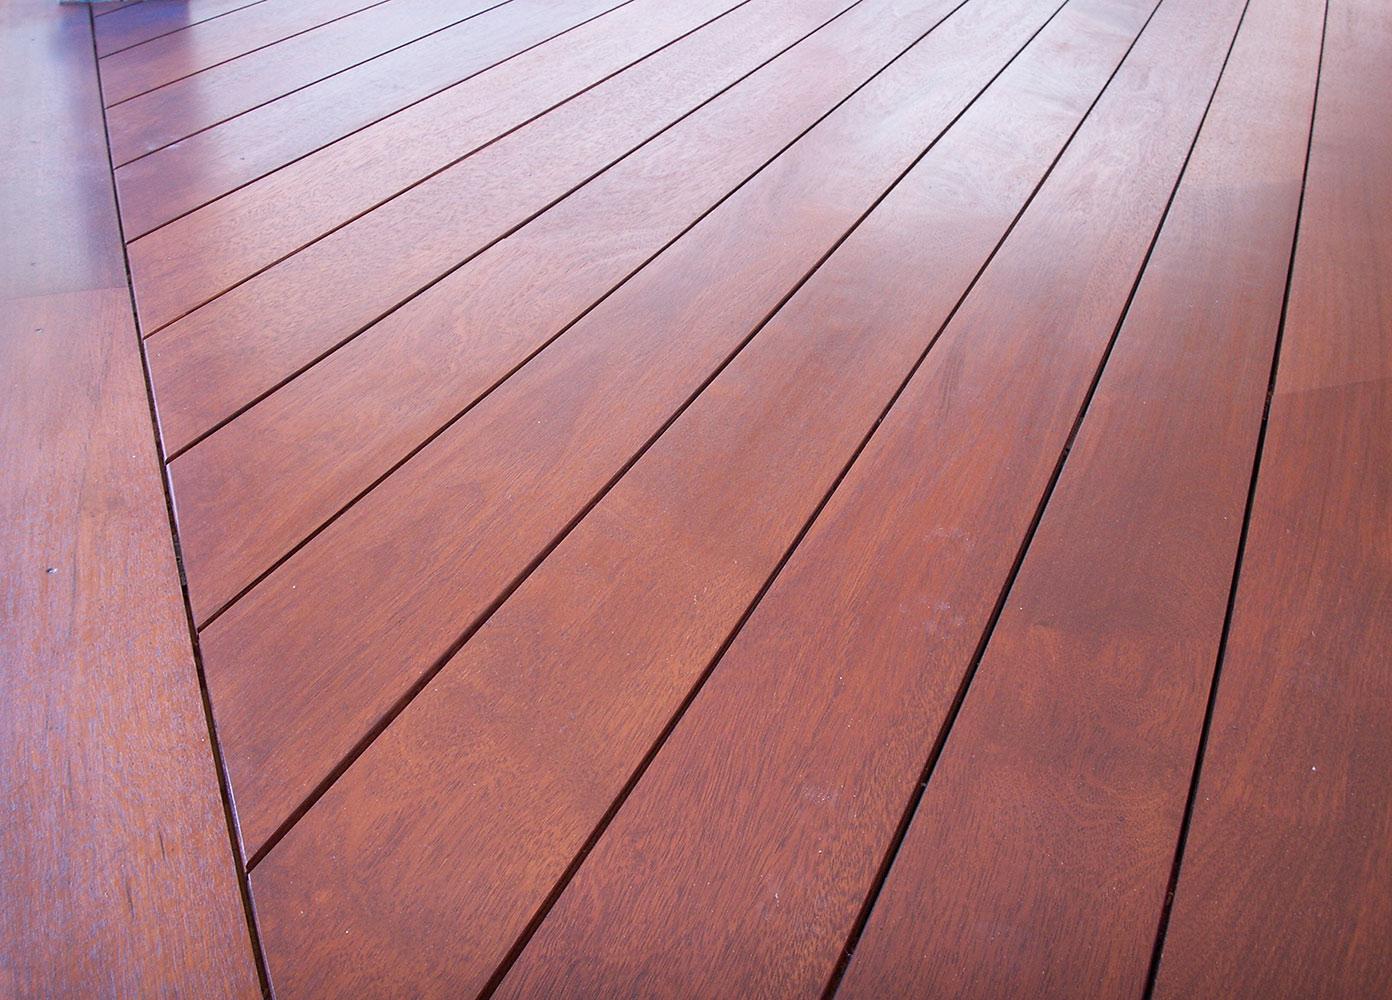 Why oil my deck?